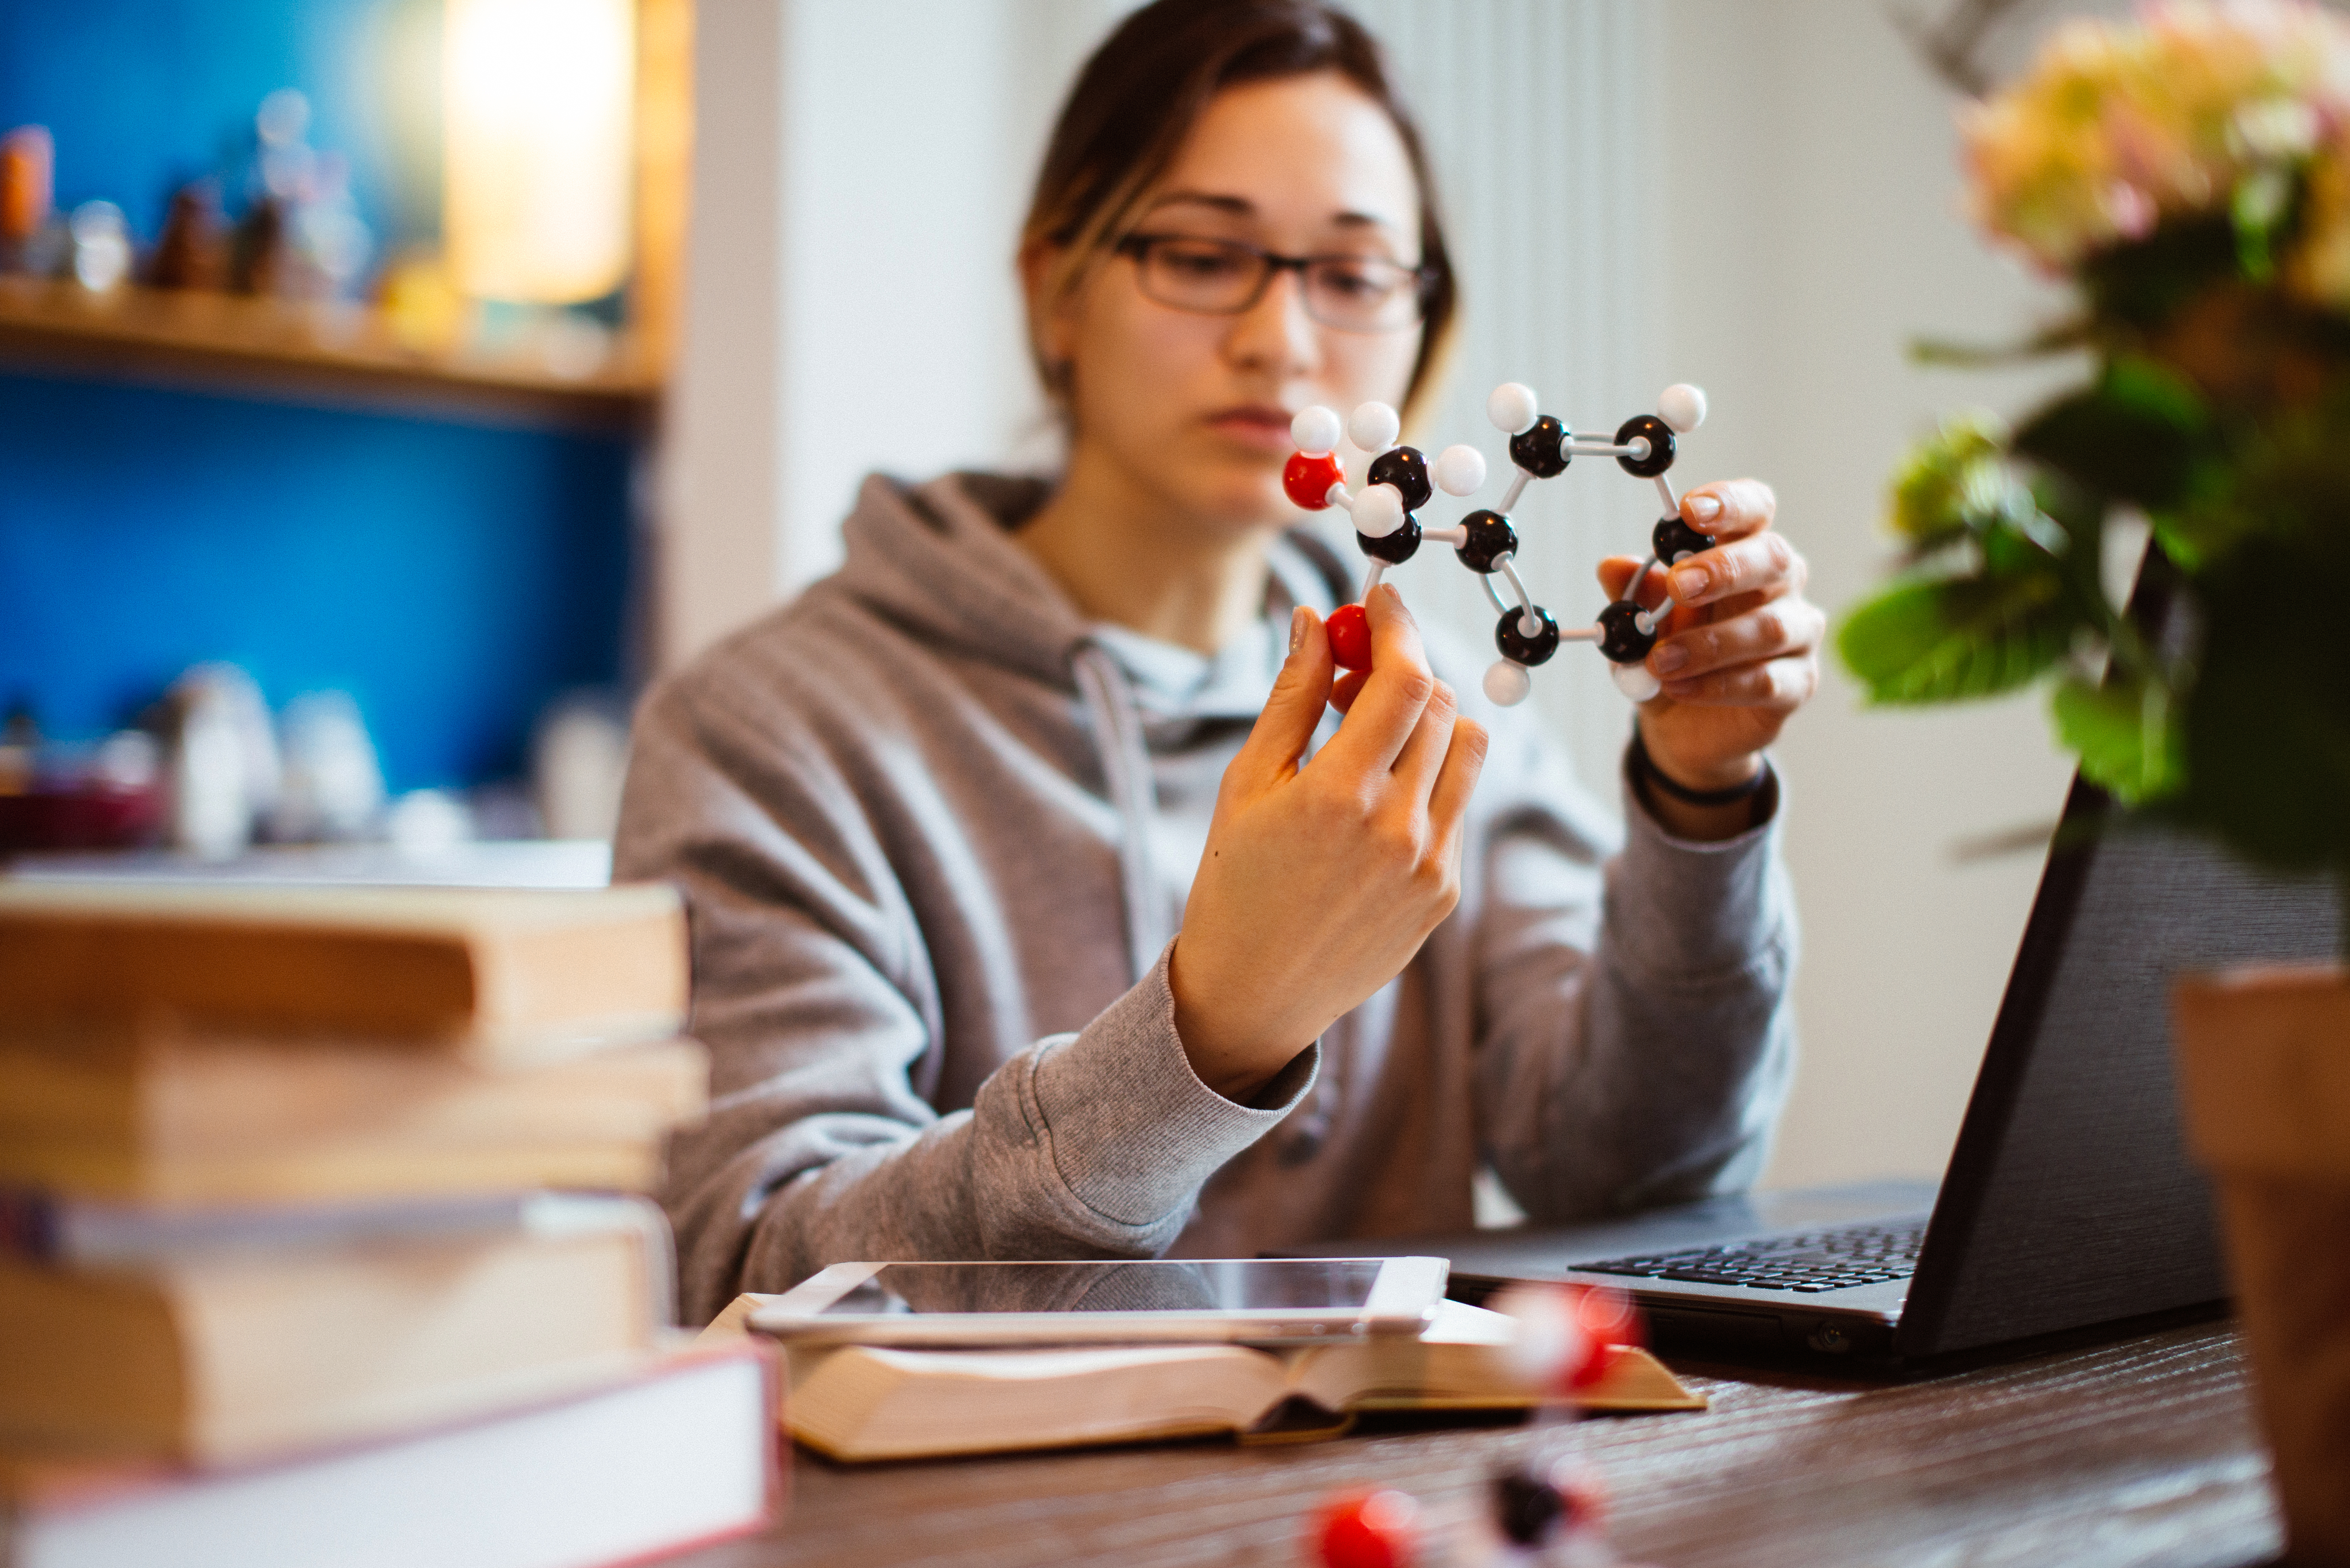 Woman examines a molecular model while studying at a computer with iPad and textbook close by